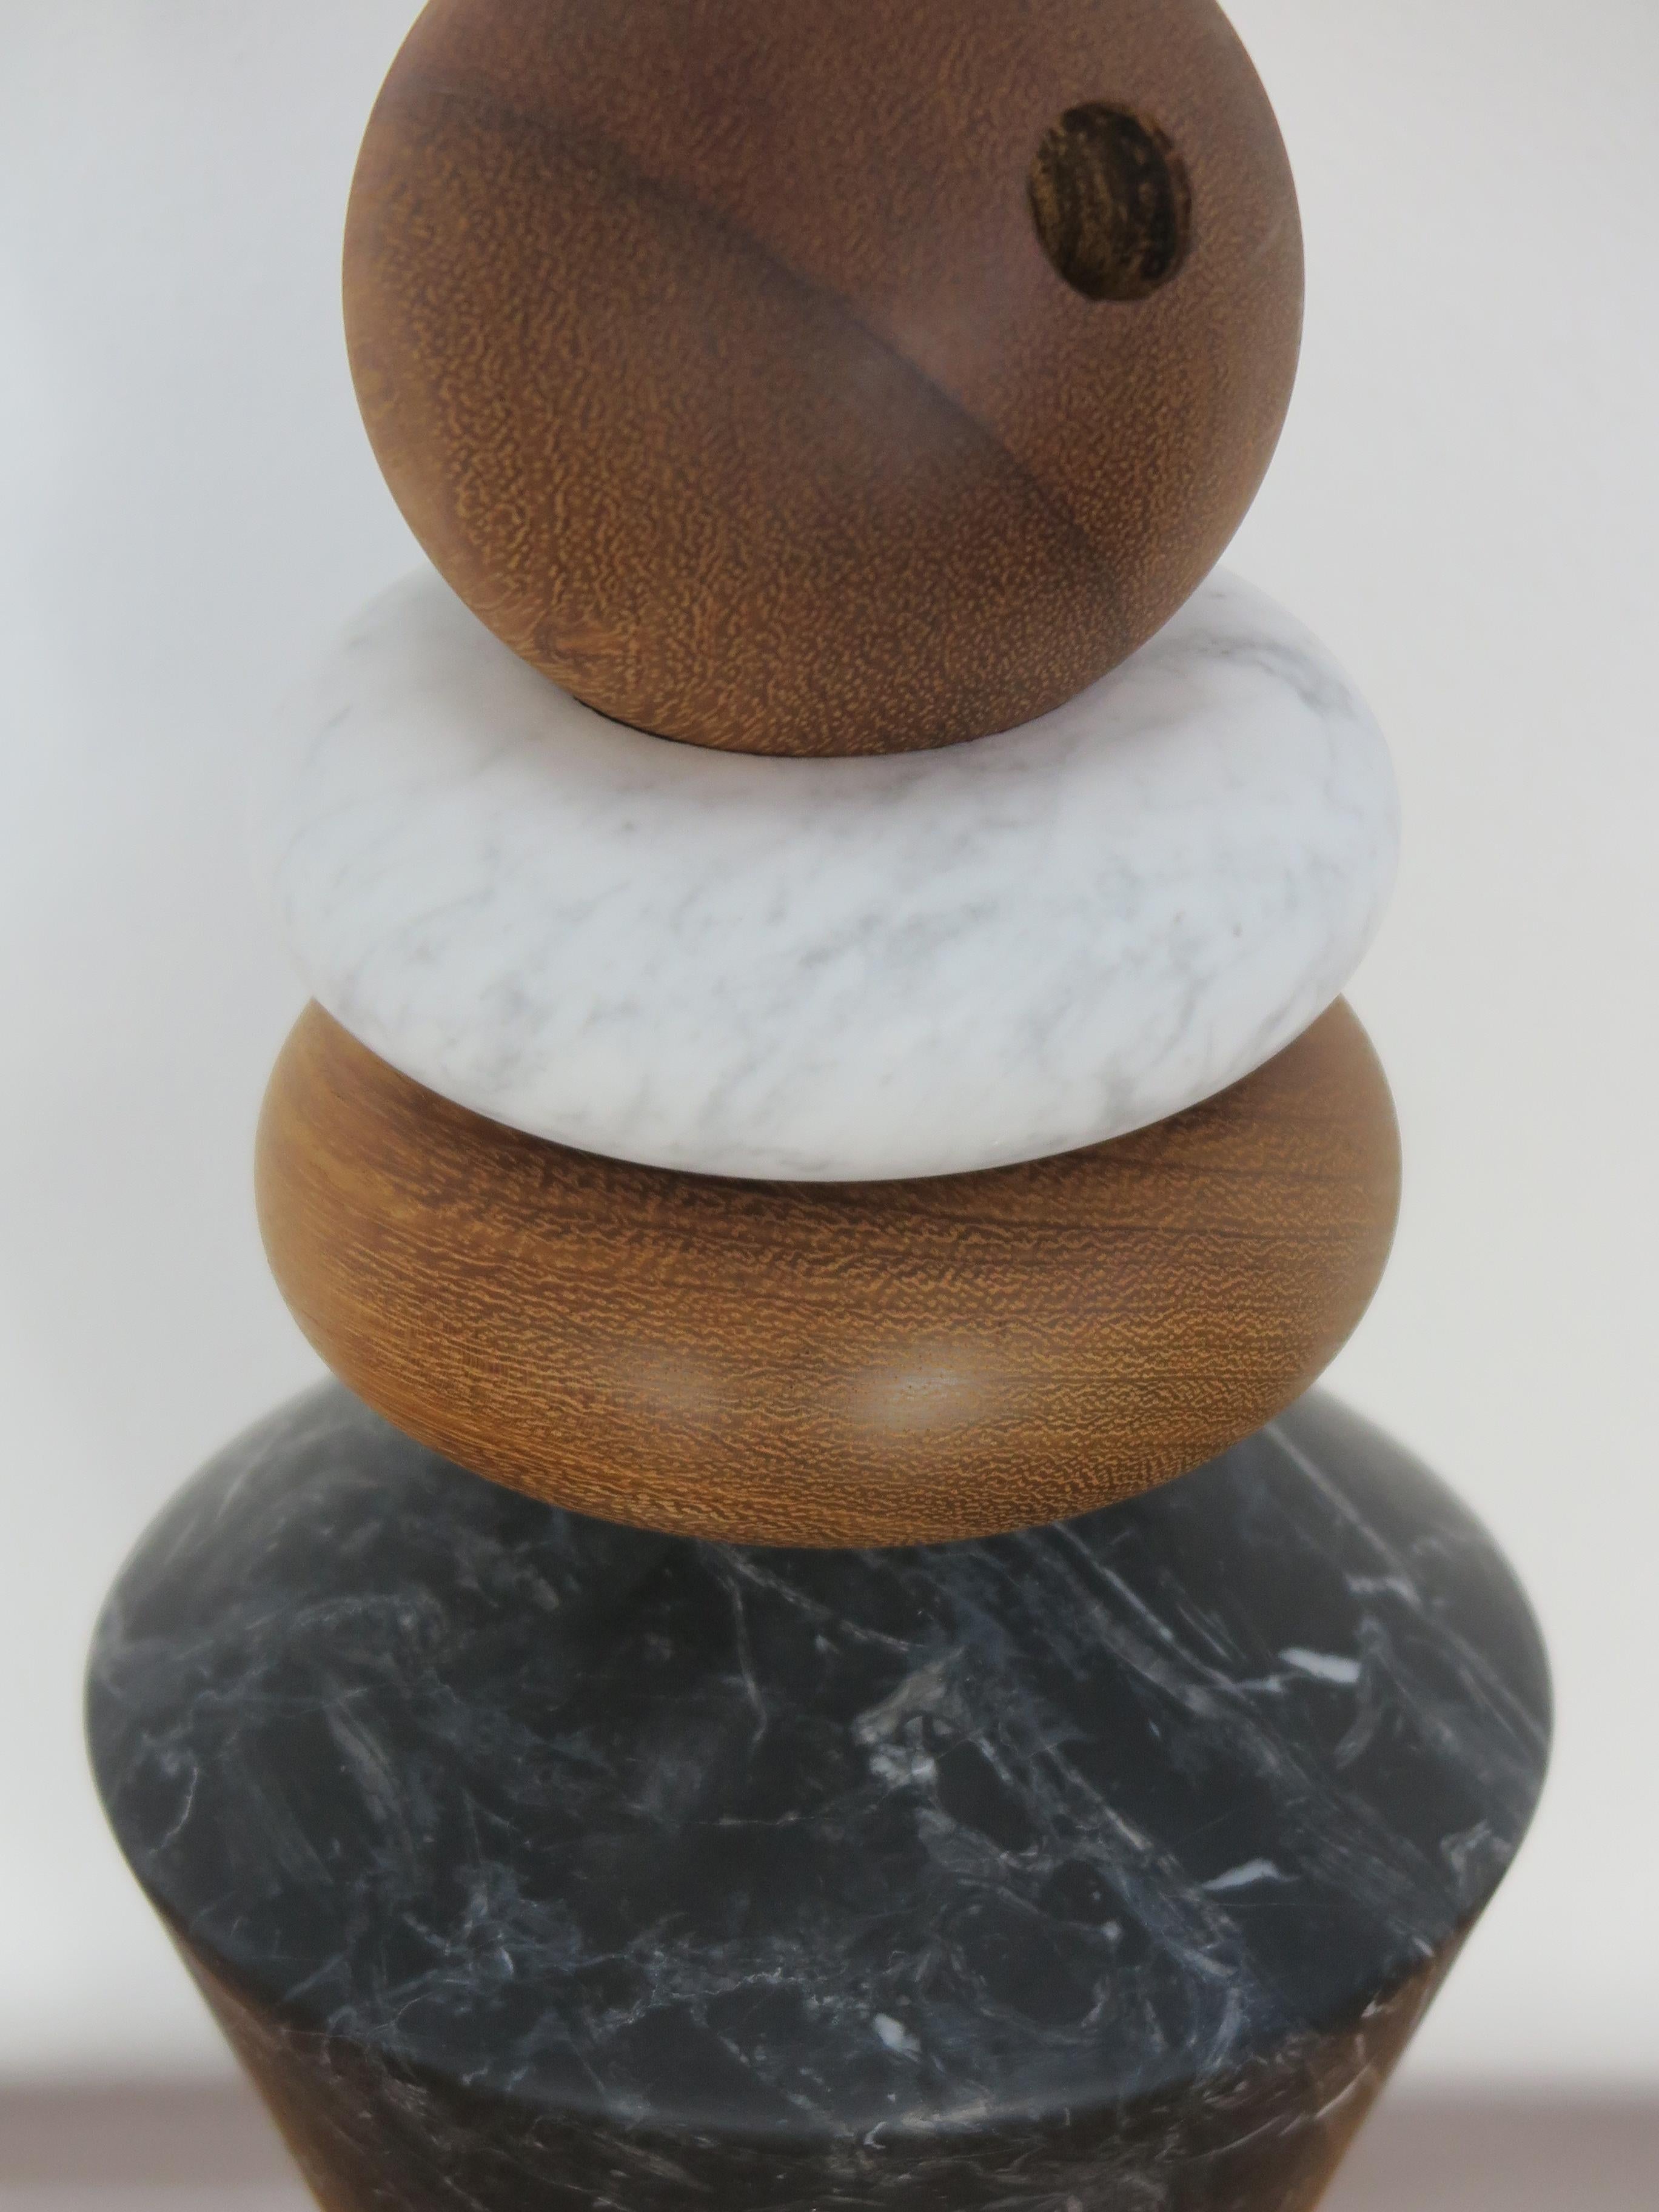 Italian Marble and Wood Contemporary Sculpture, Flower Vase 